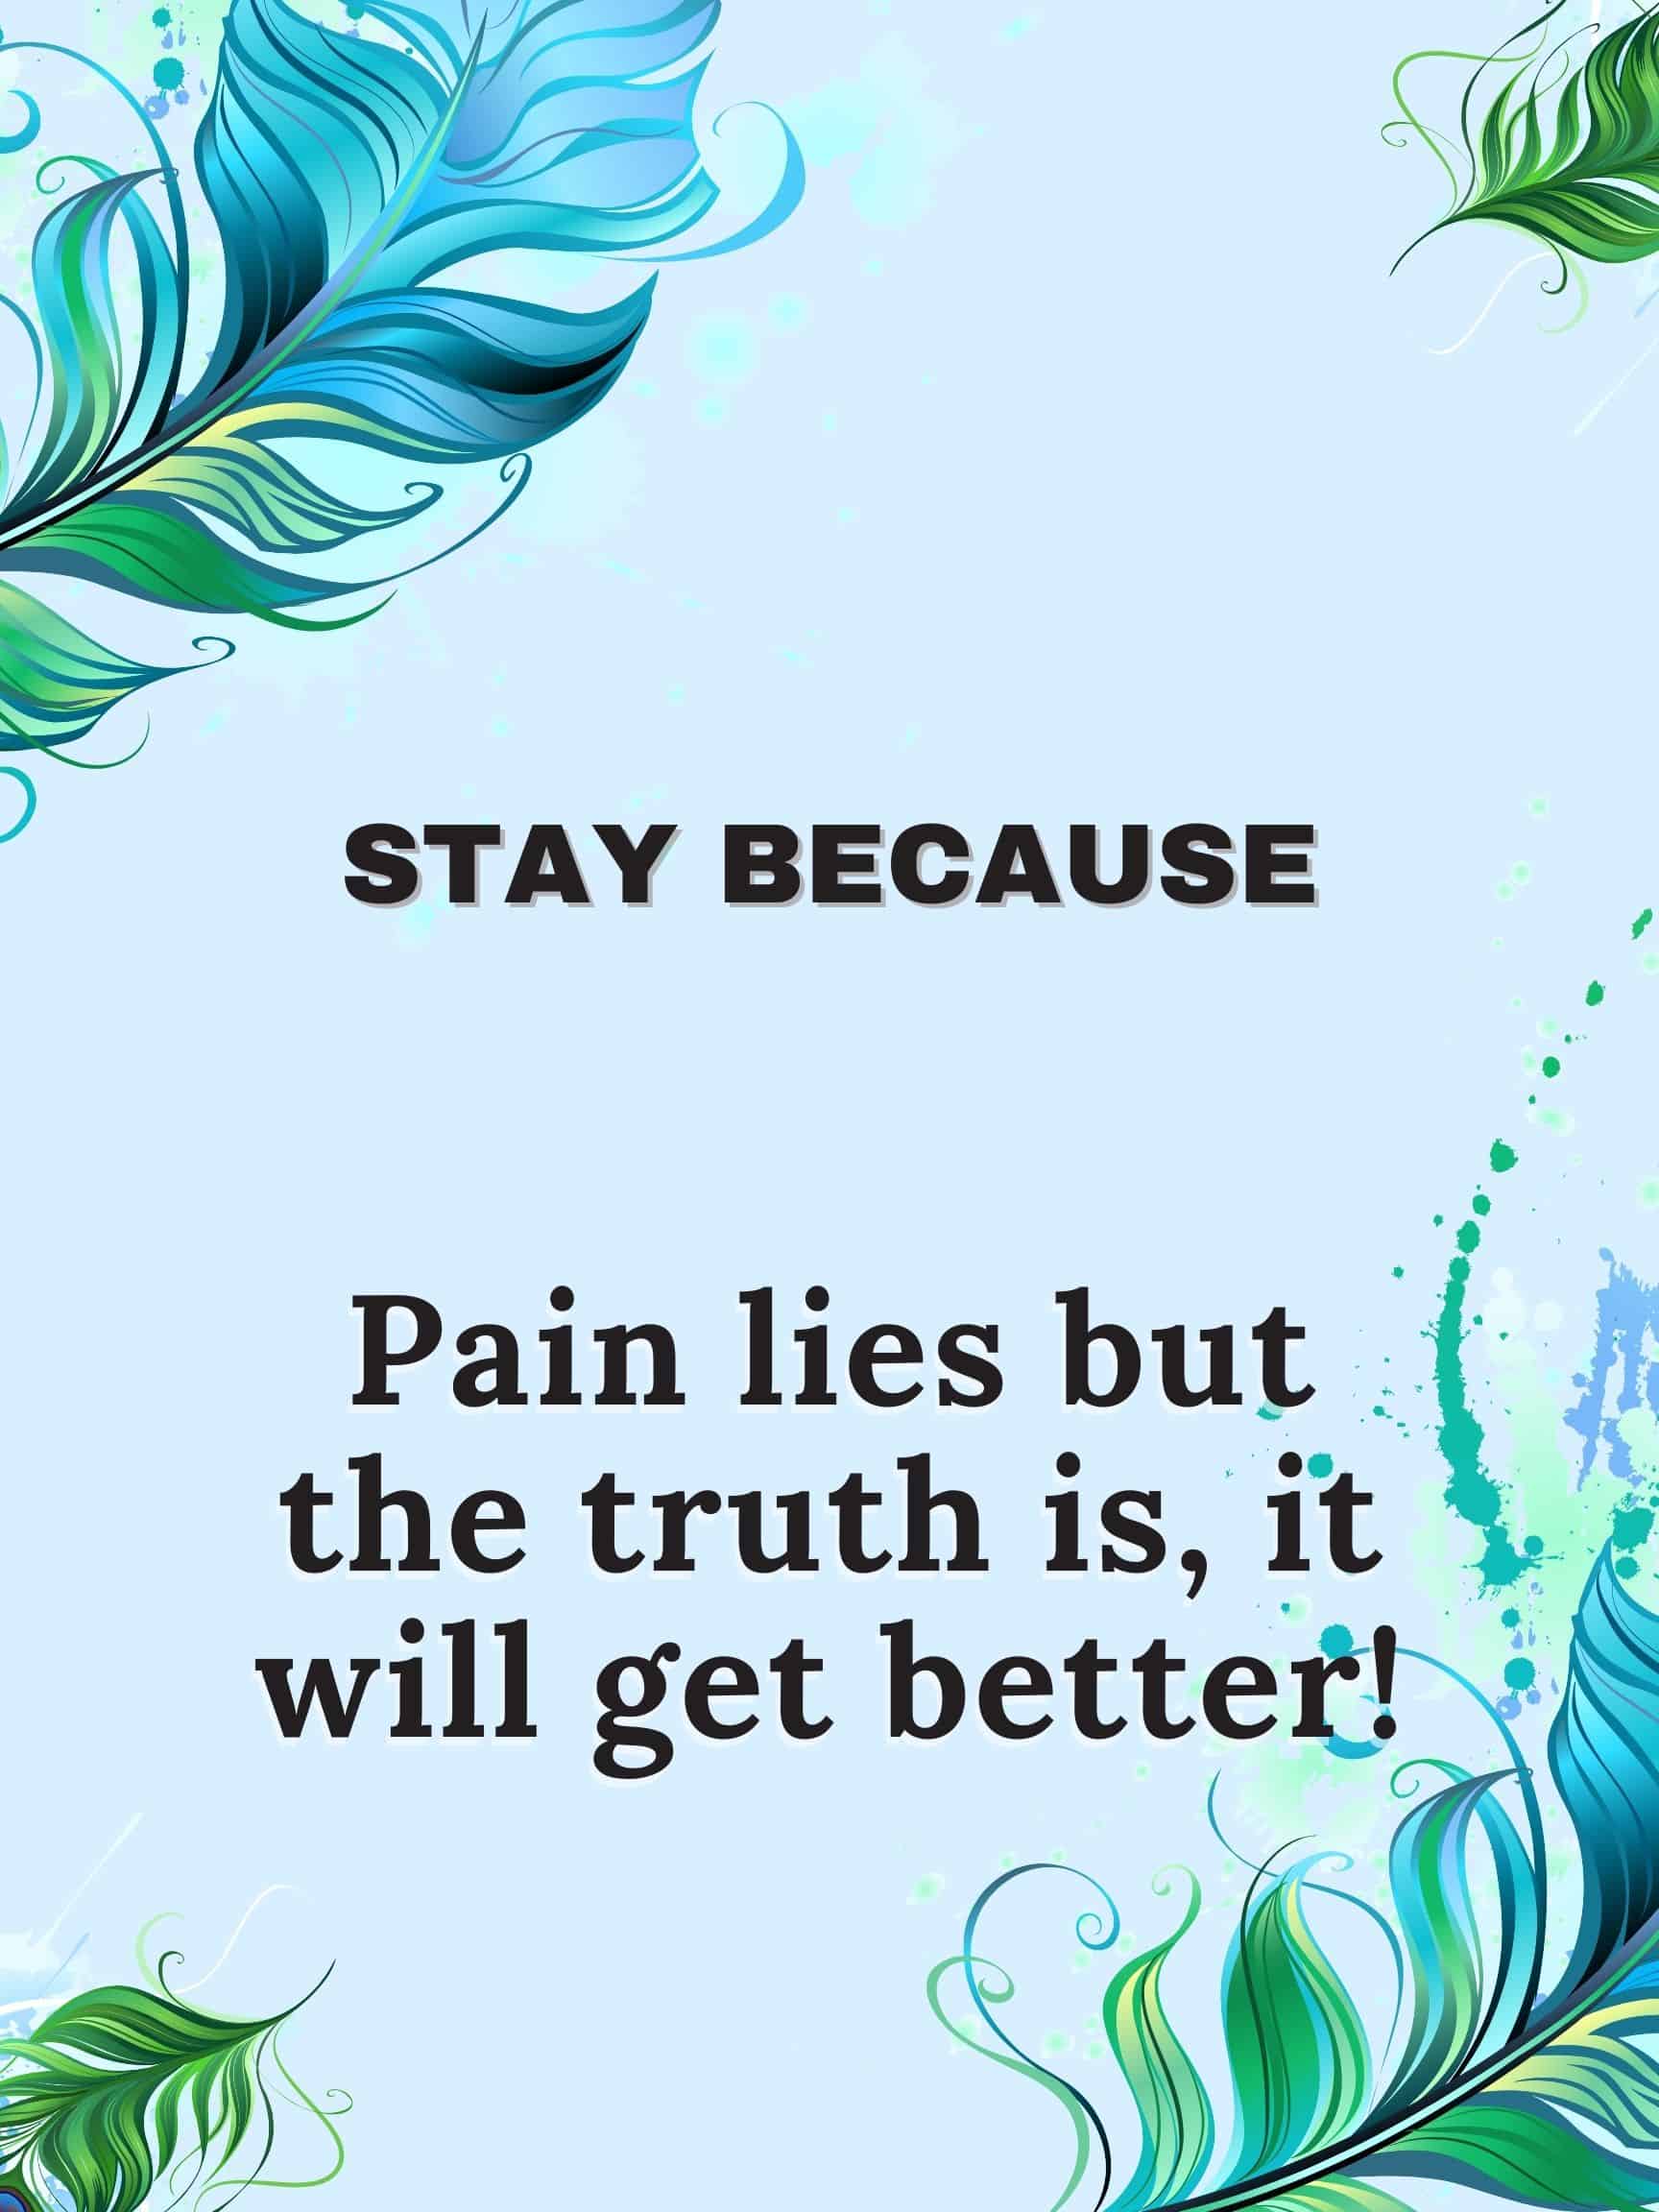 Stay because pain lies but the truth is, it will get better #StayBecause